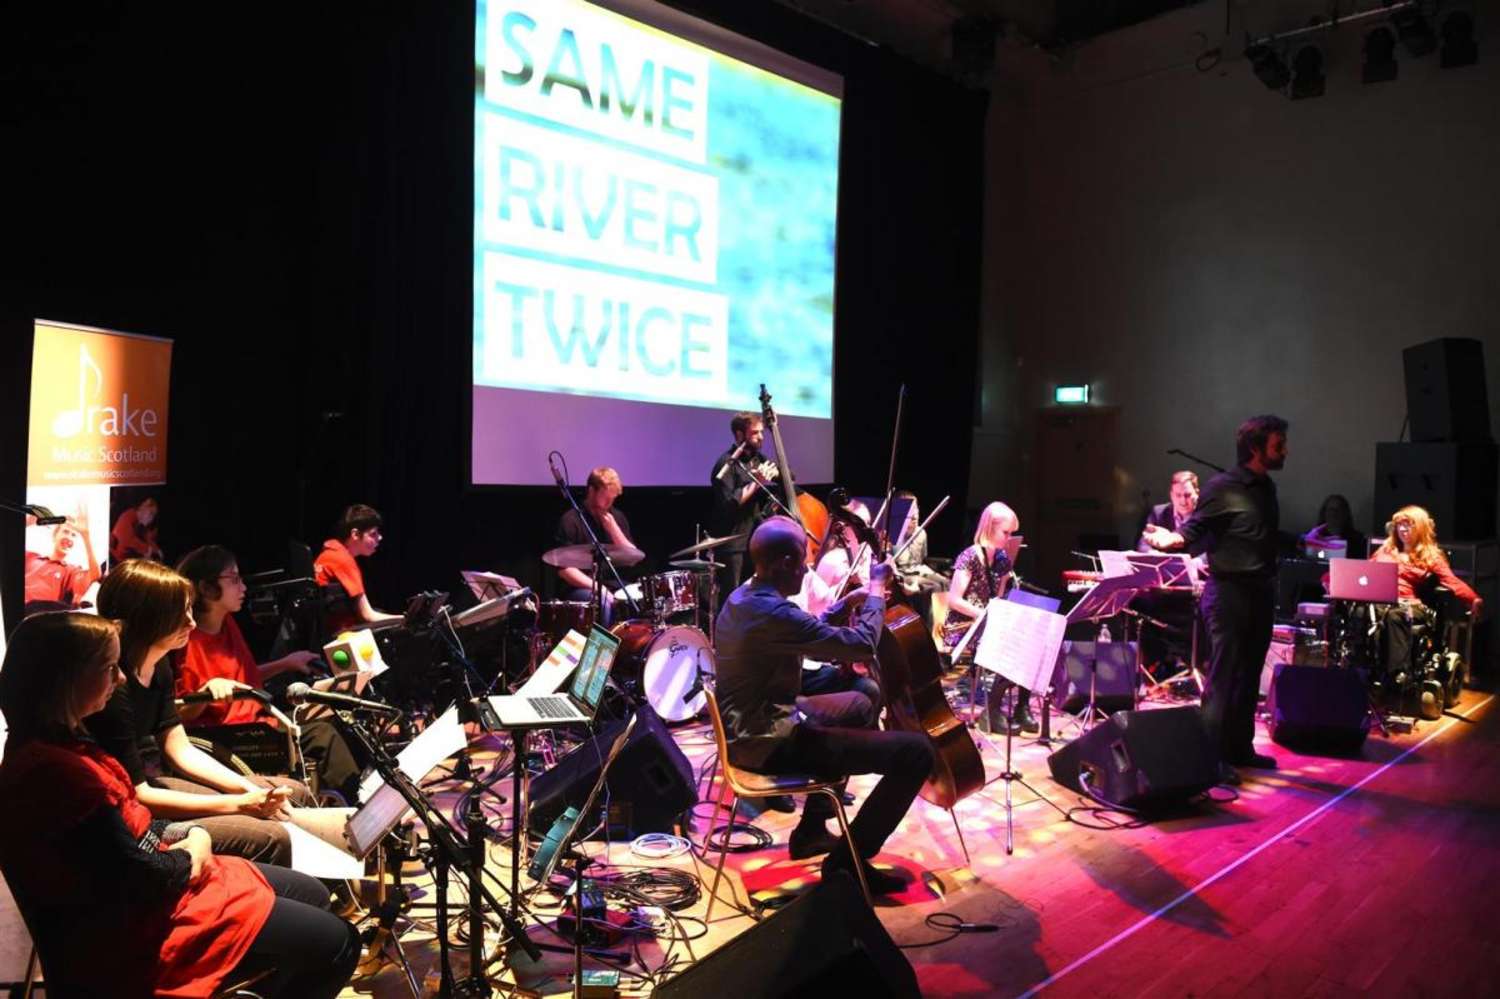 Same River Twice was the musical product of a wonderful collaboration between NYOS Jazz Collective and Drake Music Scotlandâ€™s Digital Ensemble